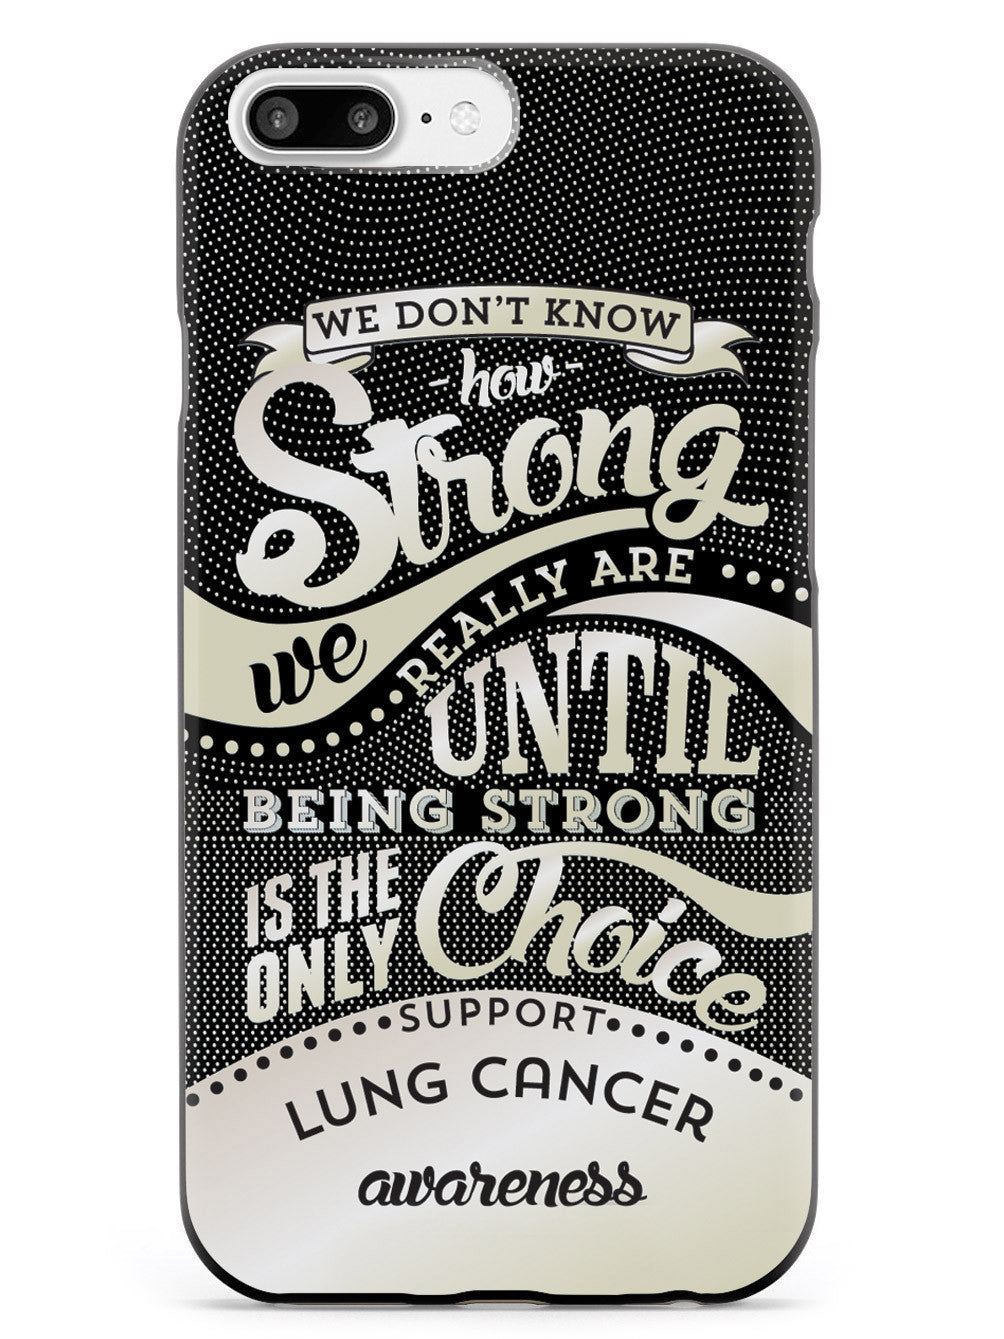 How Strong - Lung Cancer Awareness Case